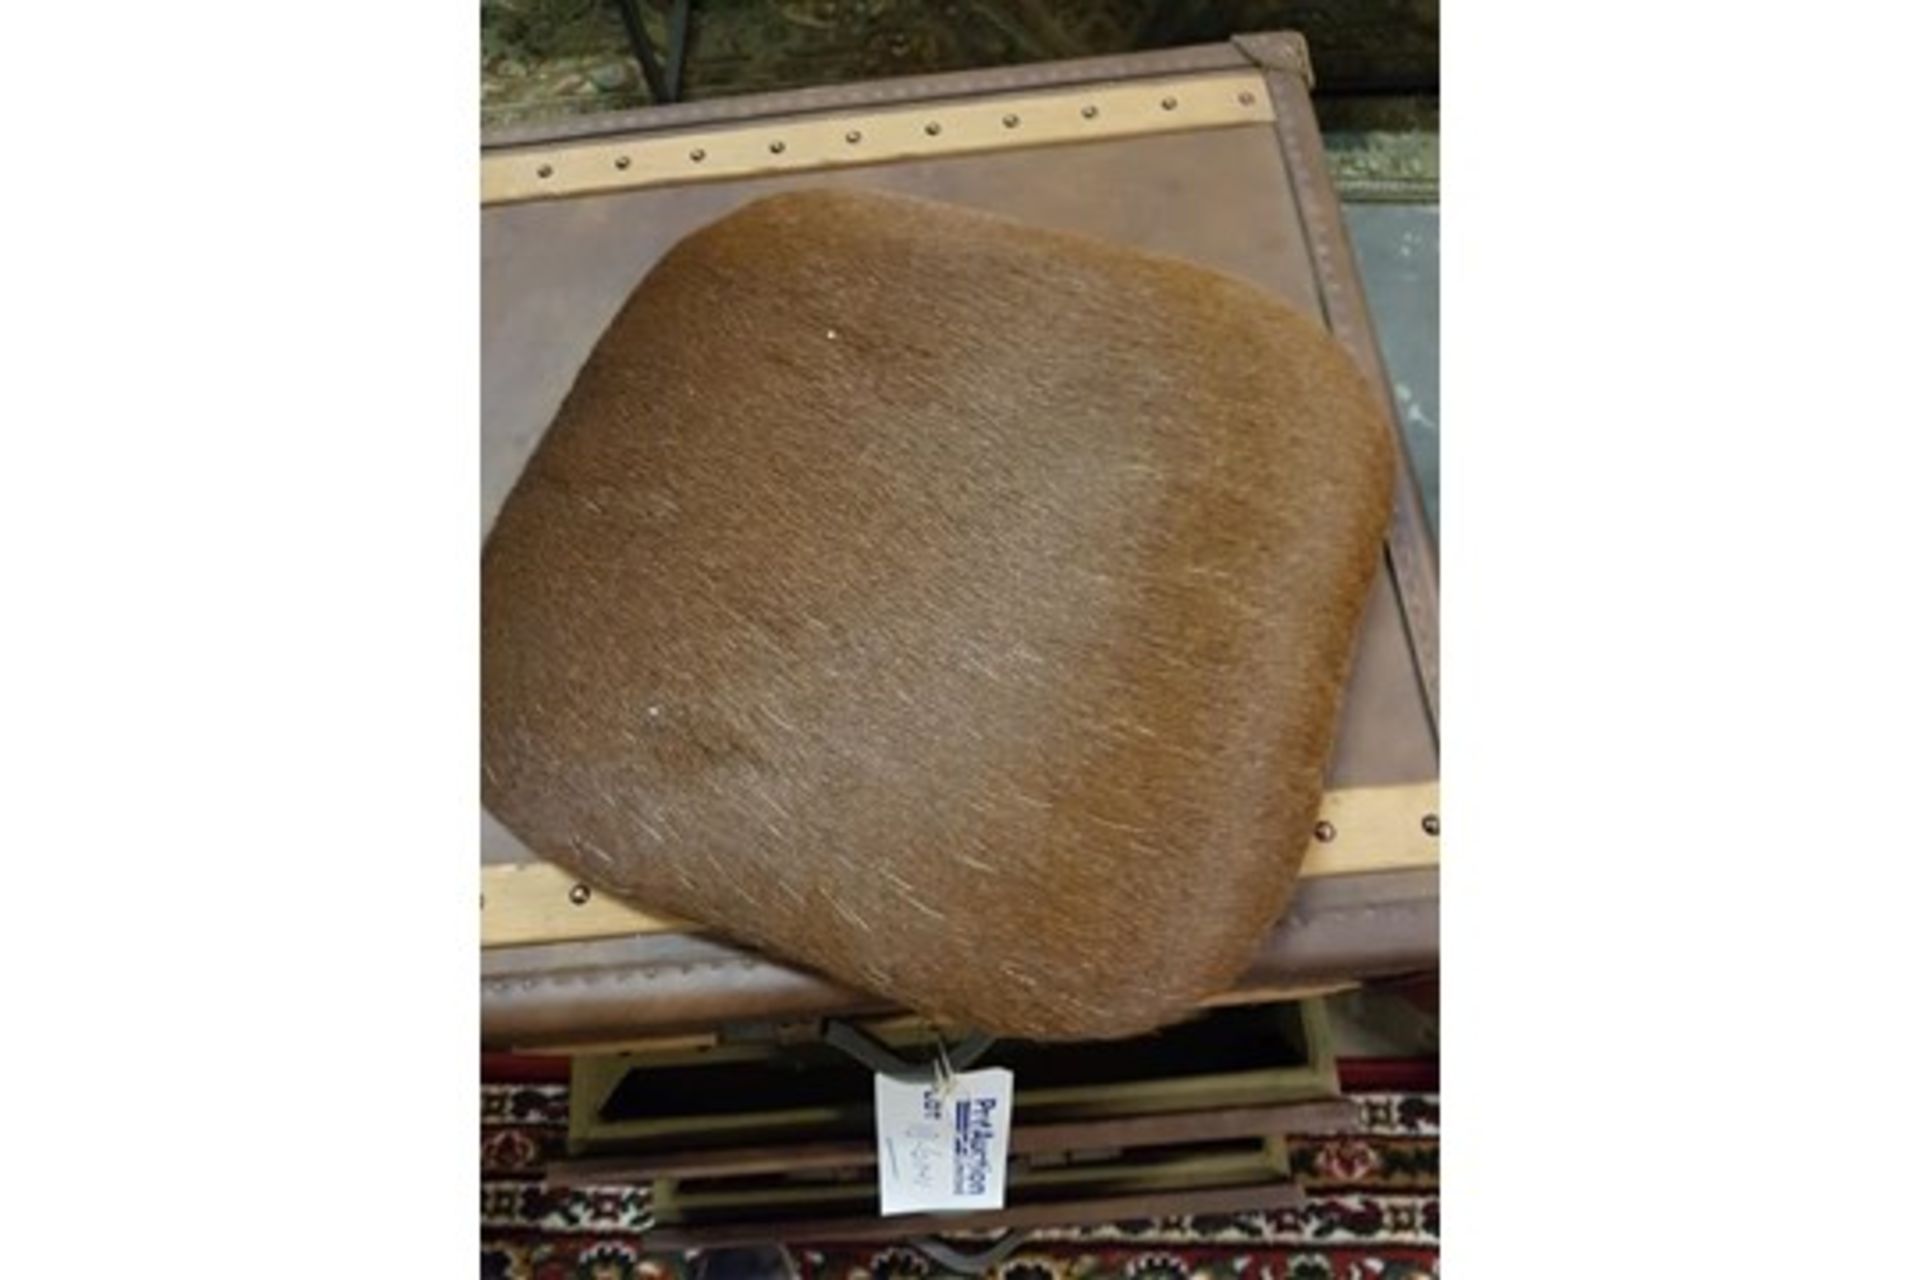 4 x Natural Hides Upholstered Seat Pad Cushion for Stools 2 x 40cm & 2 x 52cm - Image 2 of 4